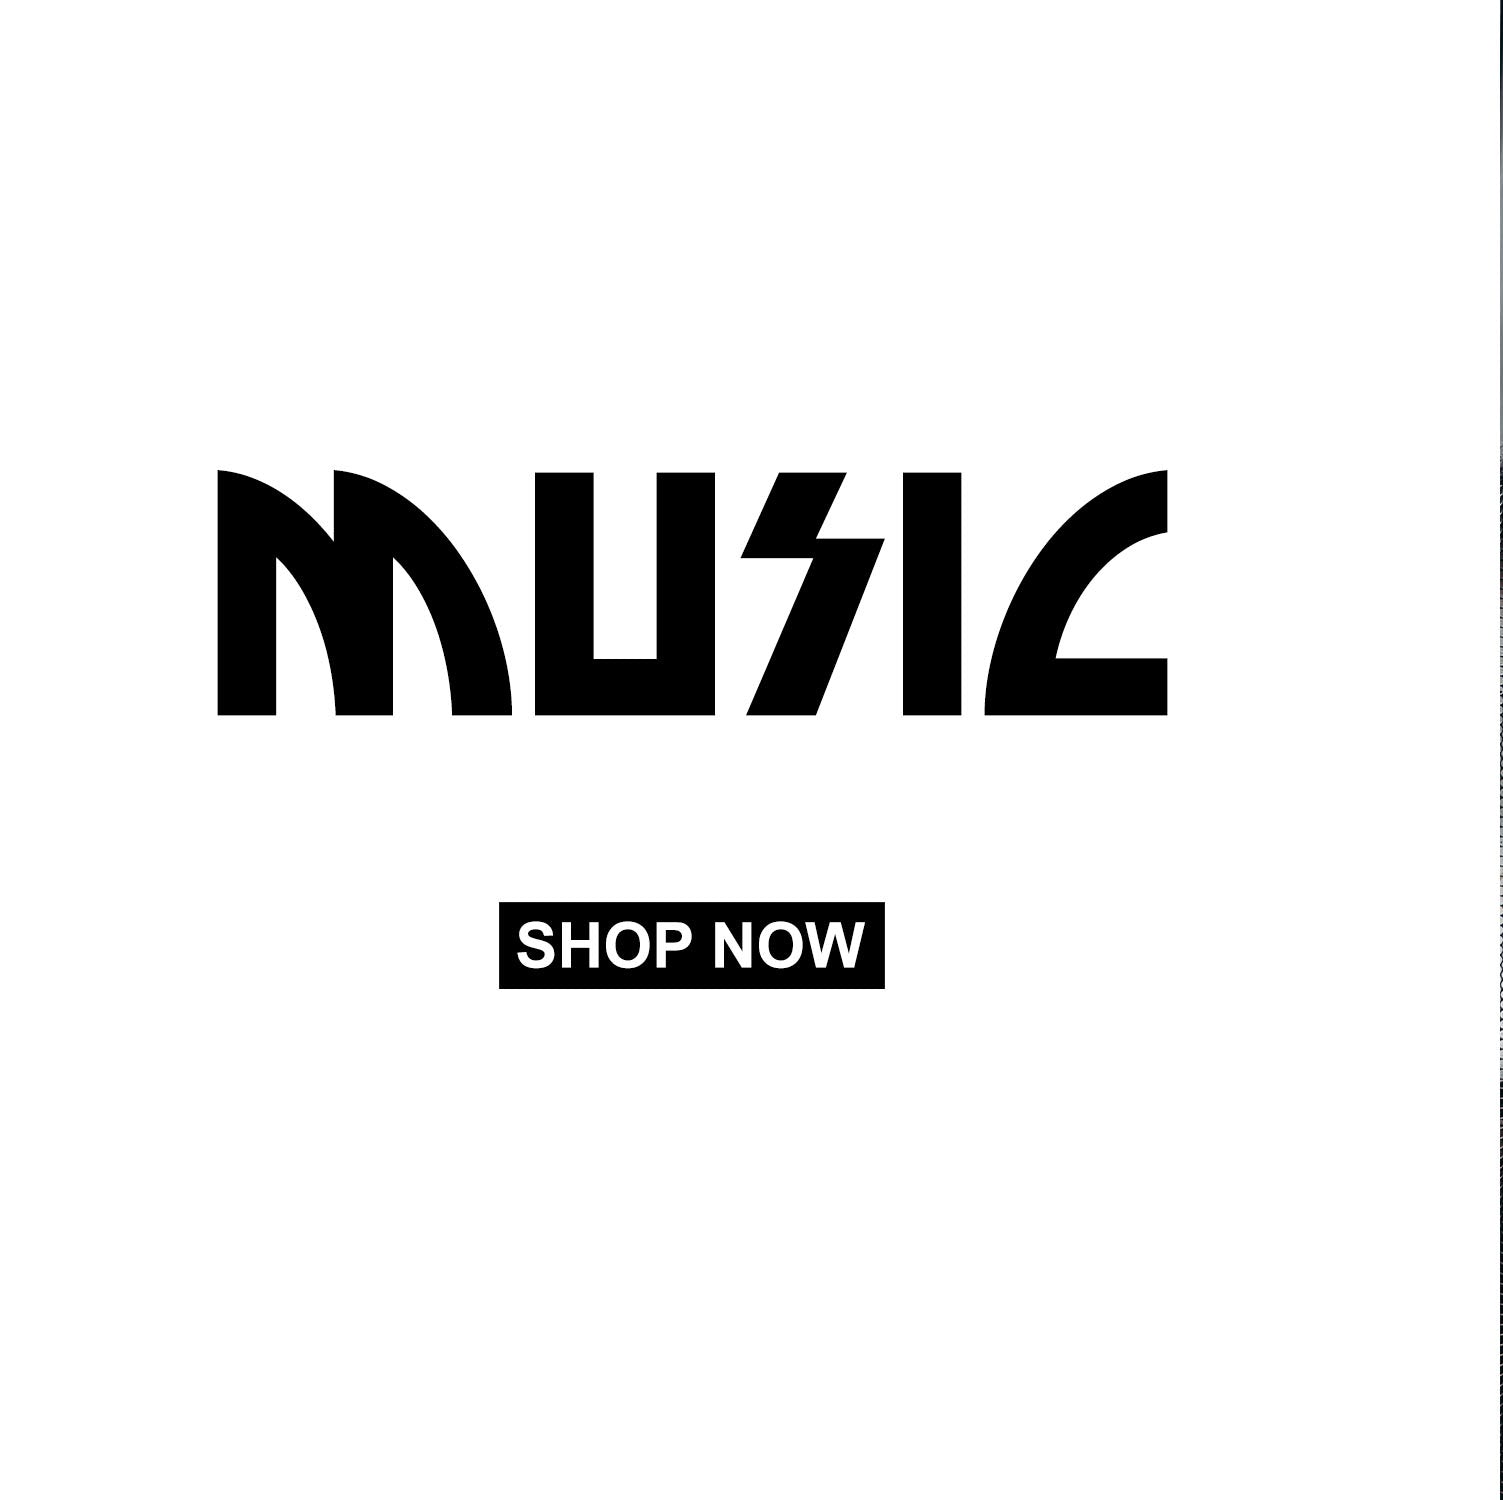 Shop the Music collection